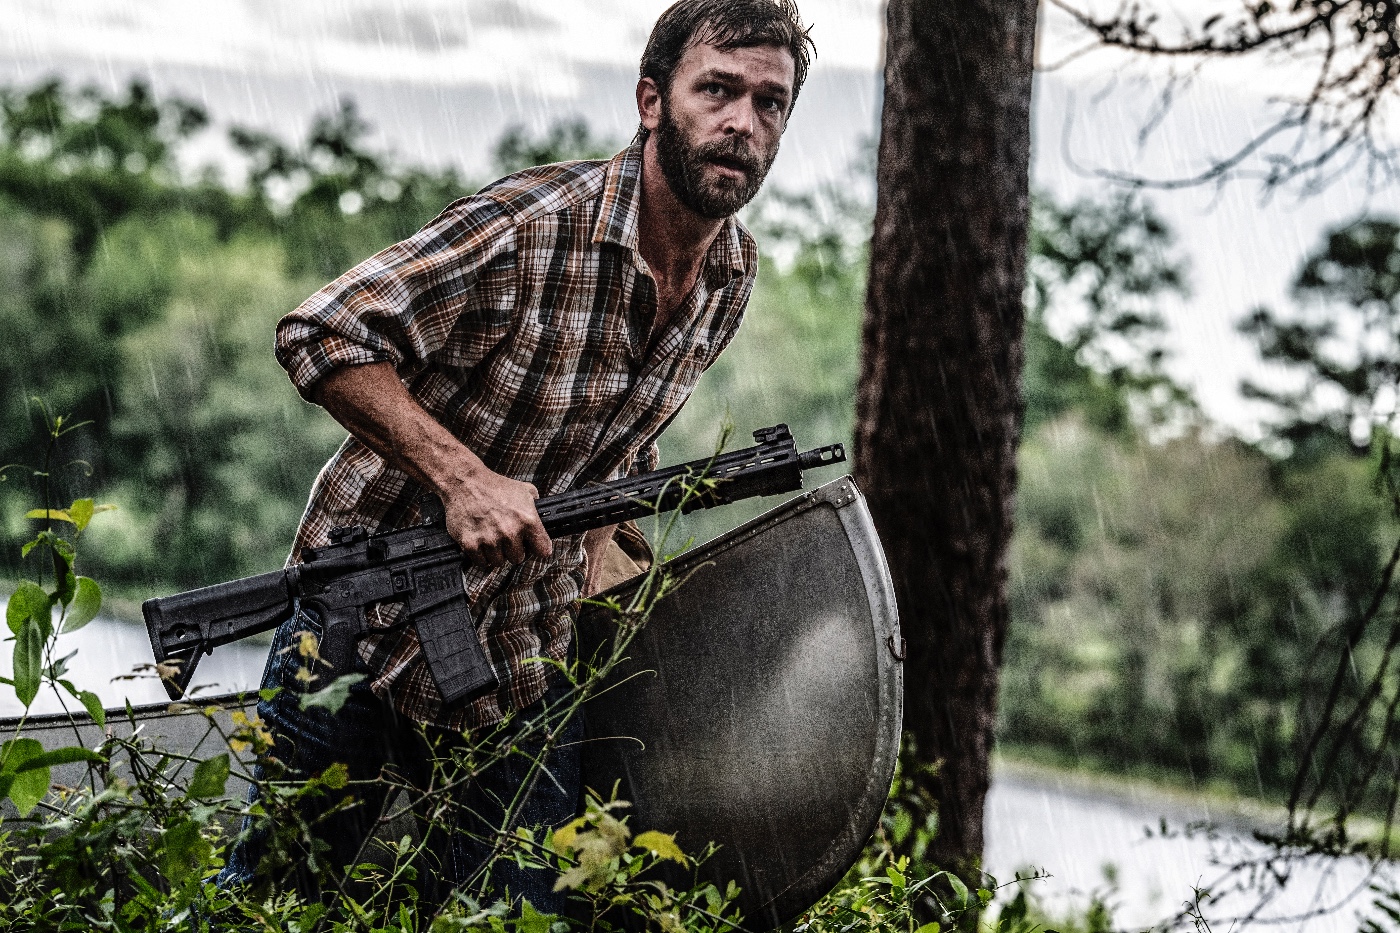 Shown here is a prepper with Springfield SAINT rifle as he pulls his canoe out of the river. Complete prepping involves preparing for a wide range of threats — from job loss to major catastrophe. Firearms are a realistic portion of comprehensive preparations.